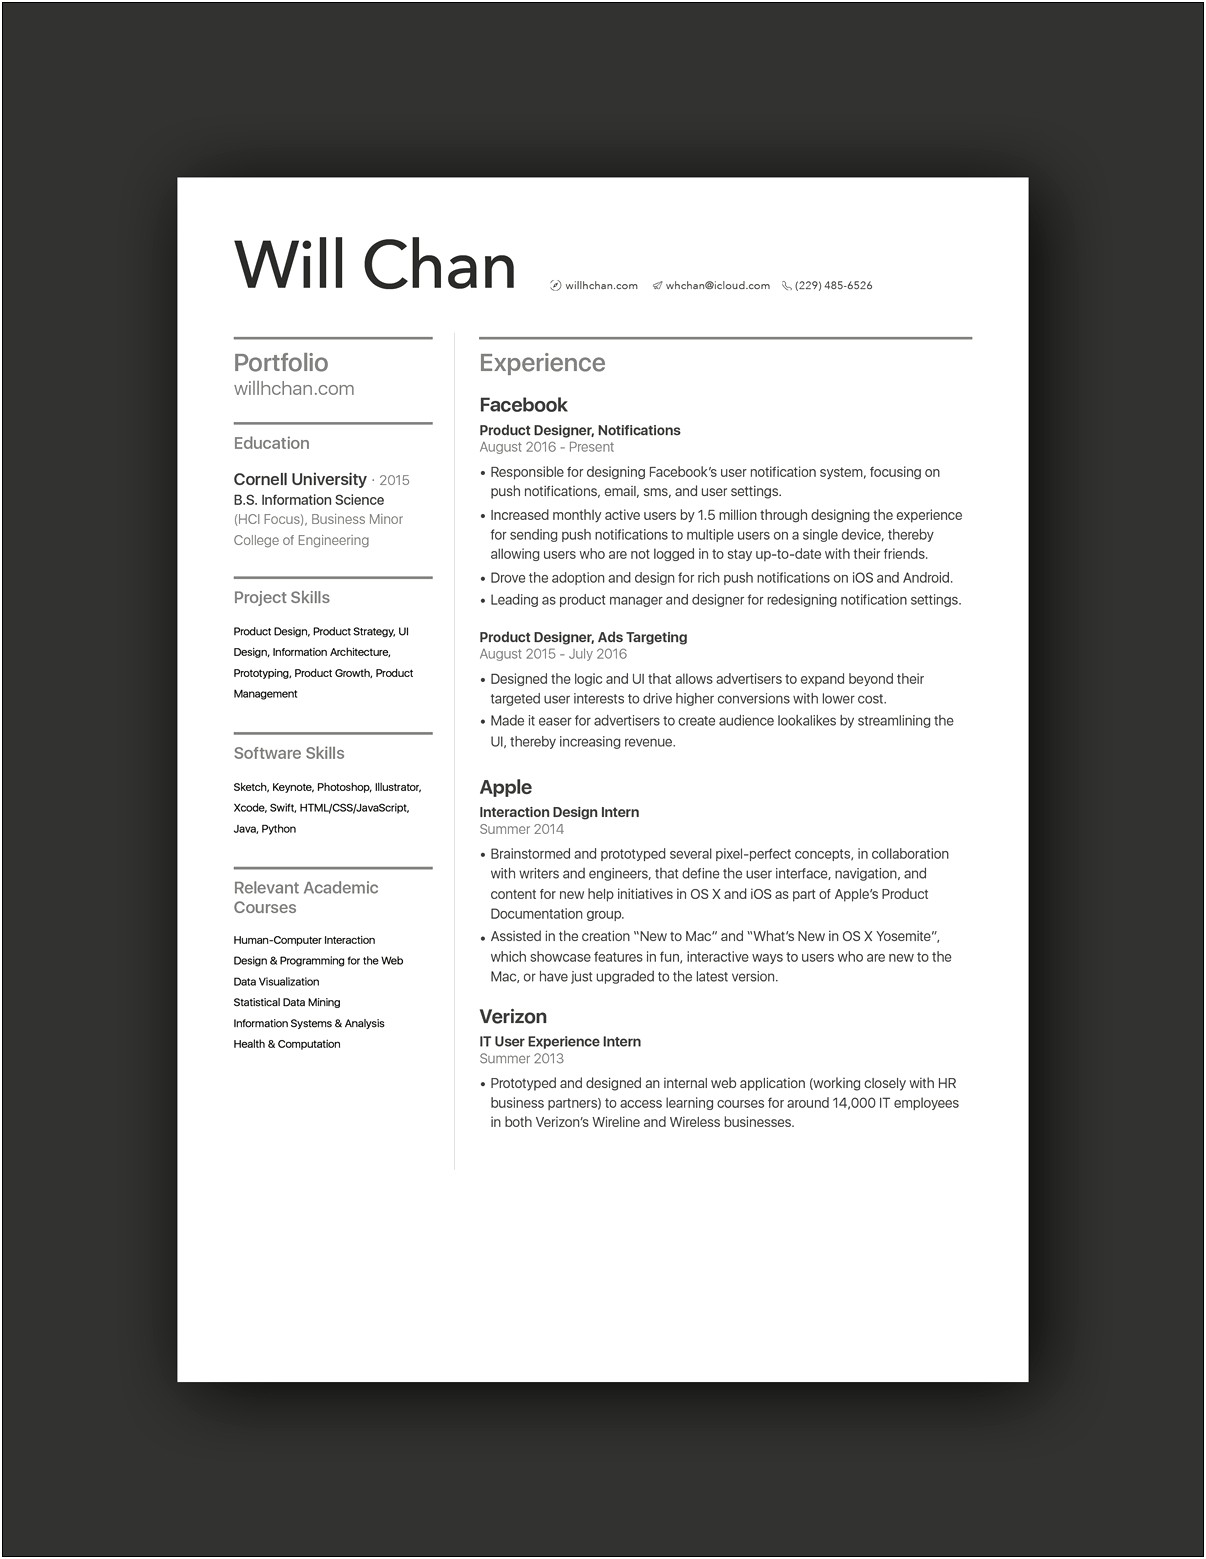 Clean Room Experience As Skill On Resume